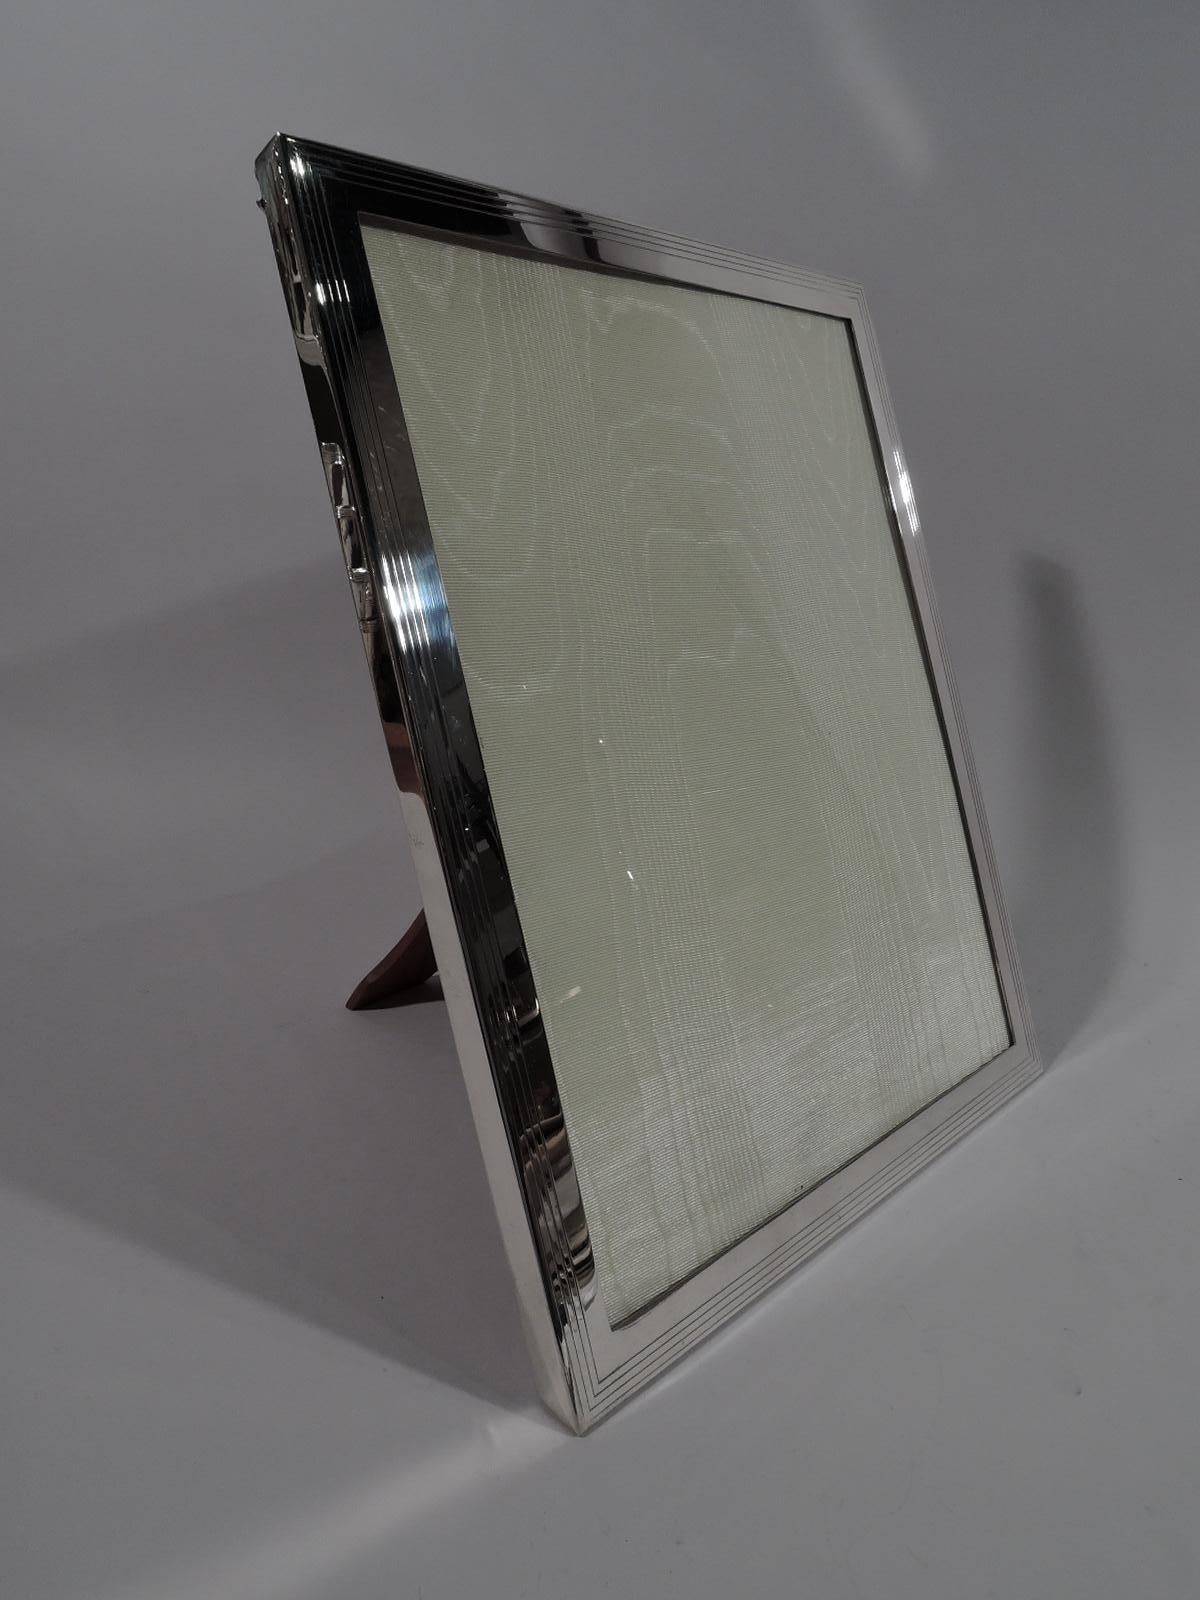 Mid-Century Modern sterling silver picture frame. Made by Tiffany & Co. in New York. Rectangular window and flat surround with three engraved wraparound lines. With glass, silk lining, and stained-wood back and support. For portrait (vertical)